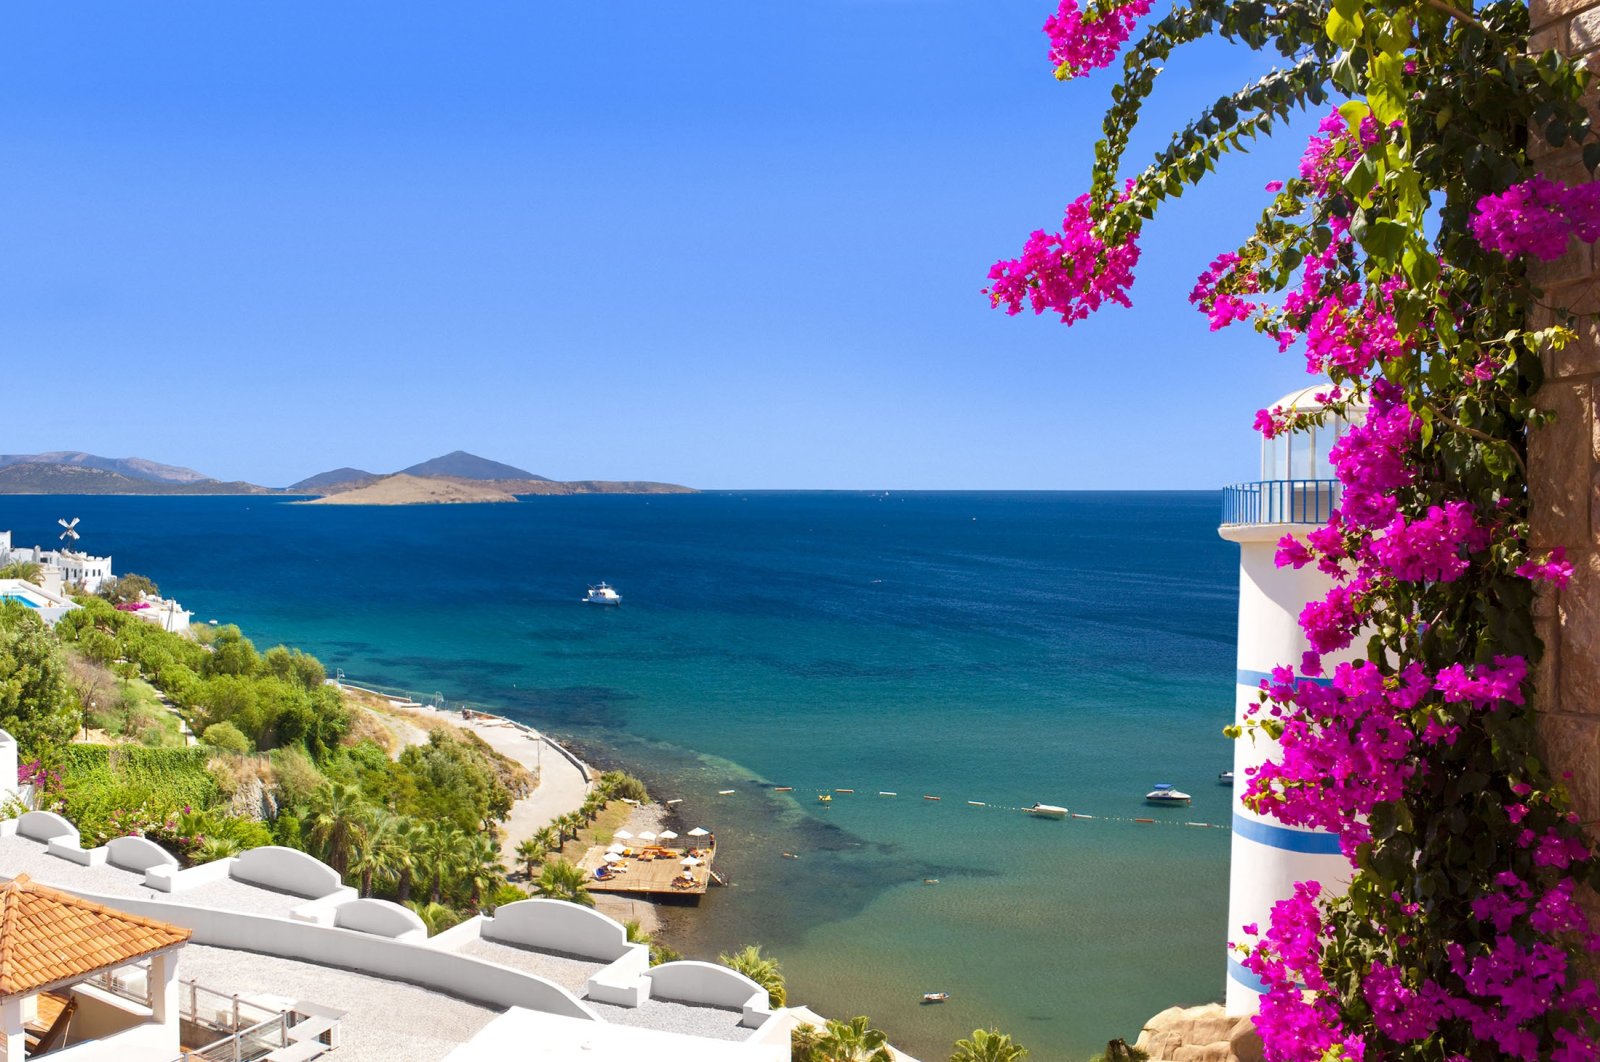 A lighthouse and the Aegean Sea as seen from Ortakent, Bodrum, Türkiye. (Shutterstock Photo)